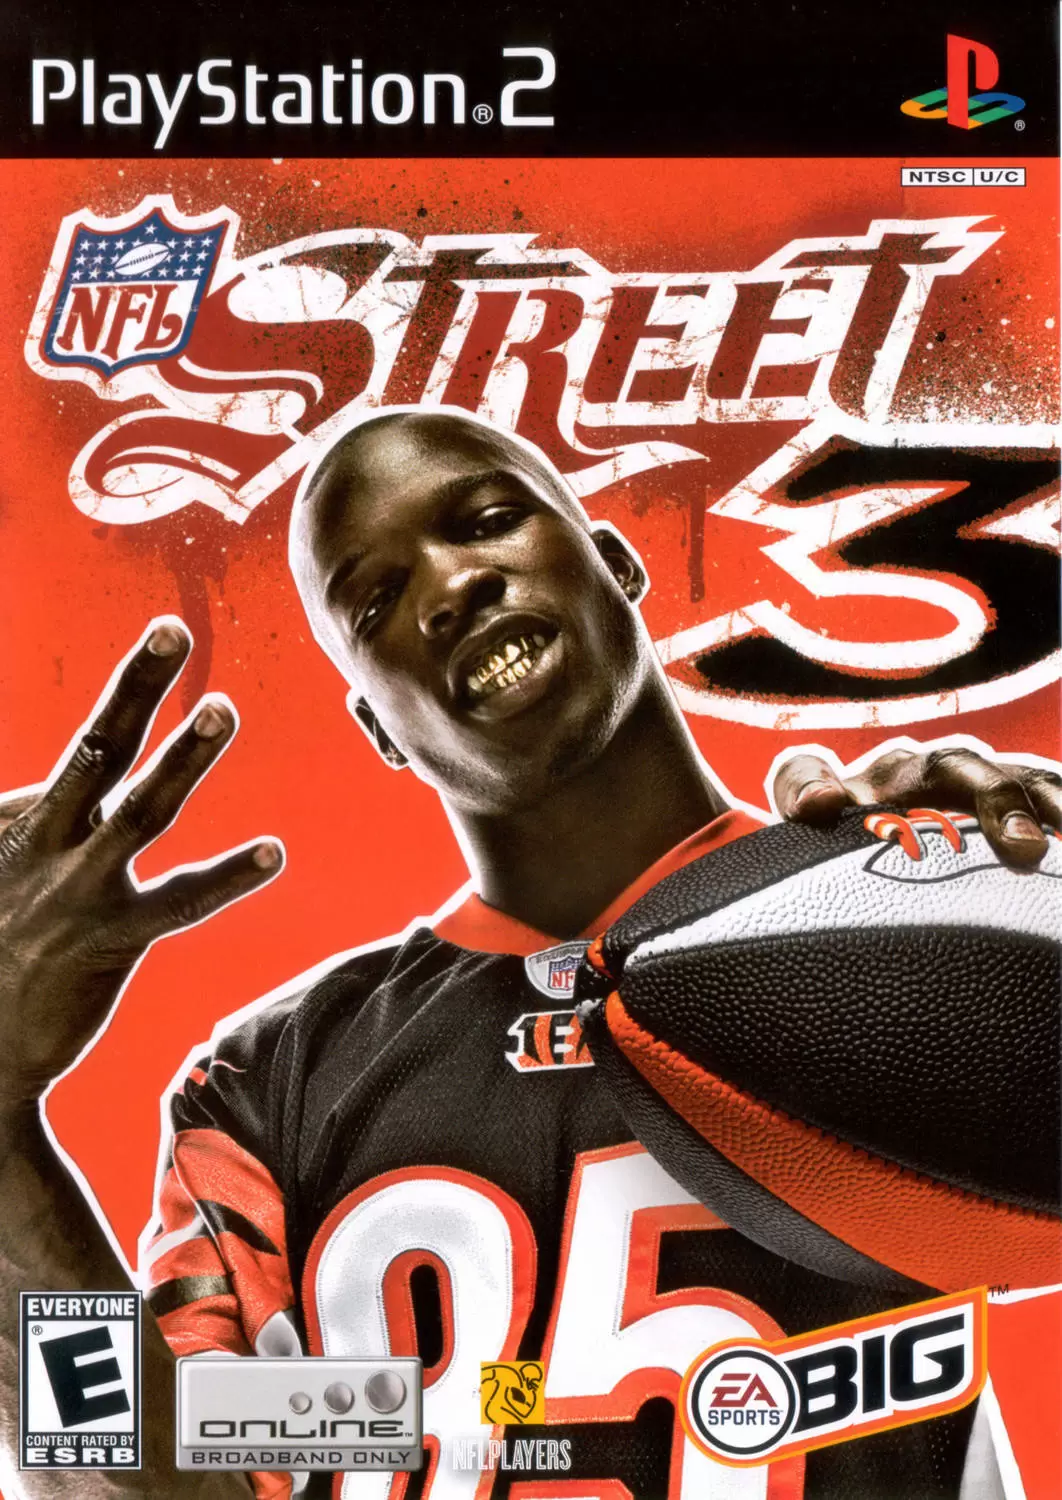 PS2 Games - NFL Street 3